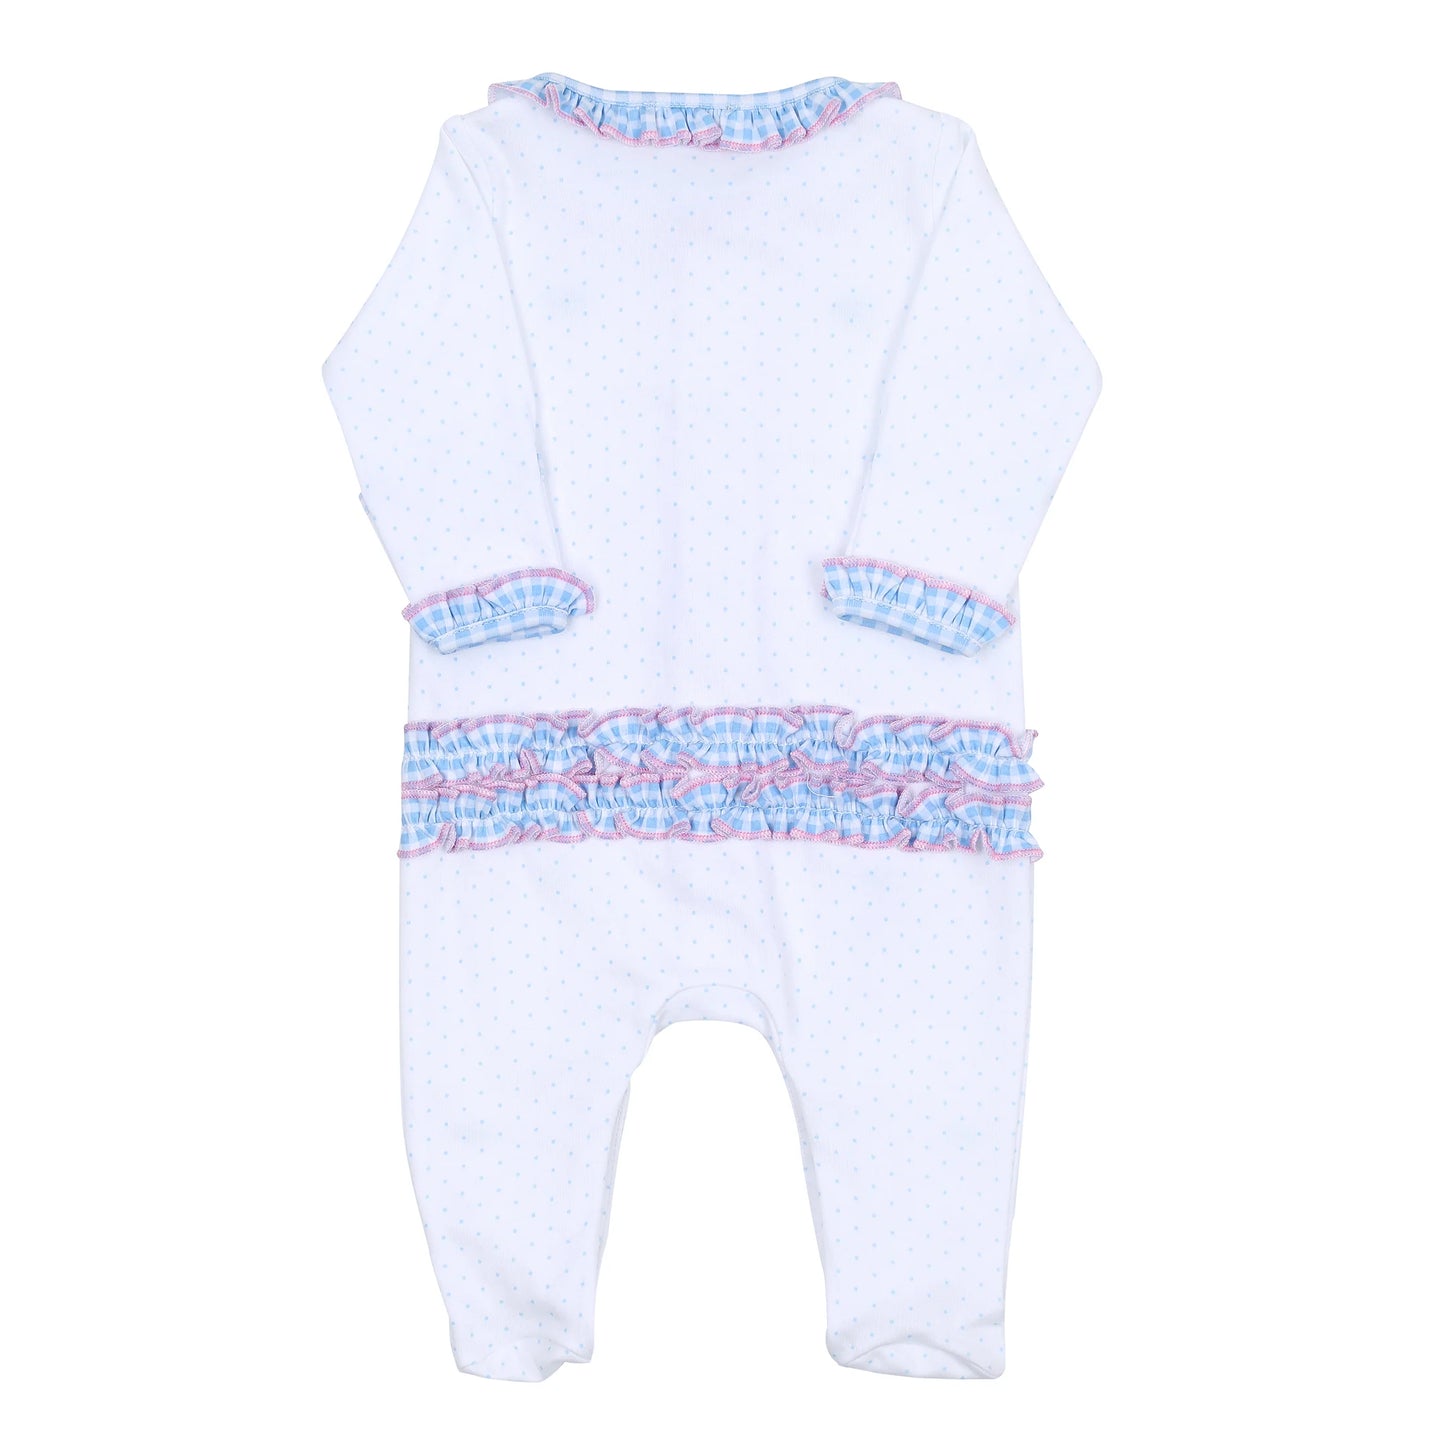 Anna's Classics Sky Blue Scattered Ruffle Footie